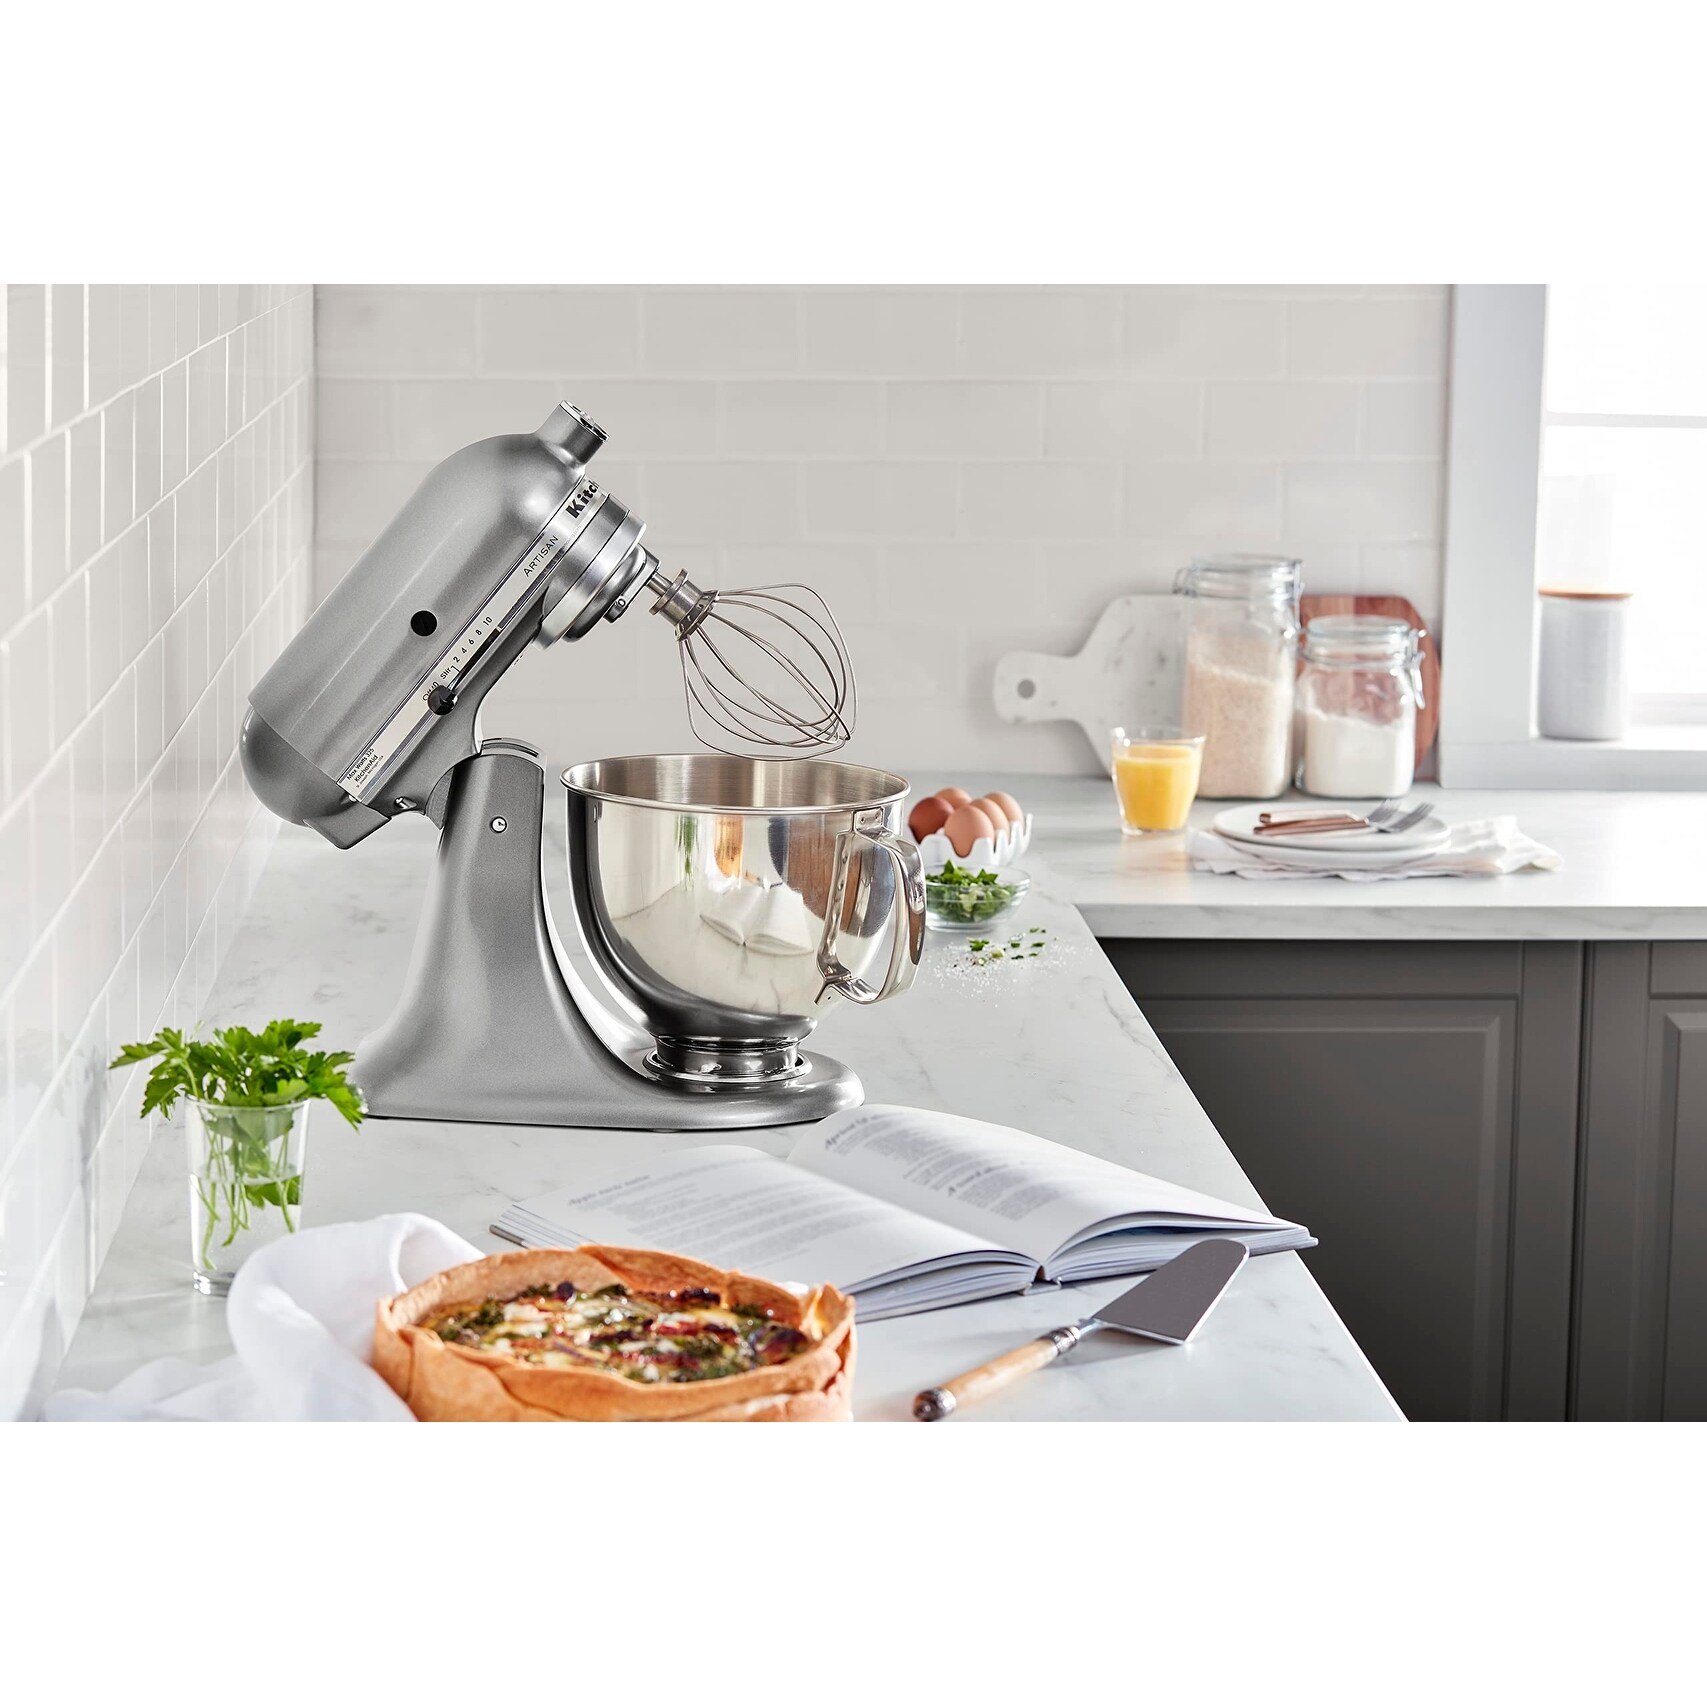 https://ak1.ostkcdn.com/images/products/is/images/direct/158141def09c579105706cba0f14dc71aee146f1/Artisan-Series-5-Quart-Tilt-Head-Stand-Mixer-with-Pouring-Shield%2C-Removable-bowl.jpg